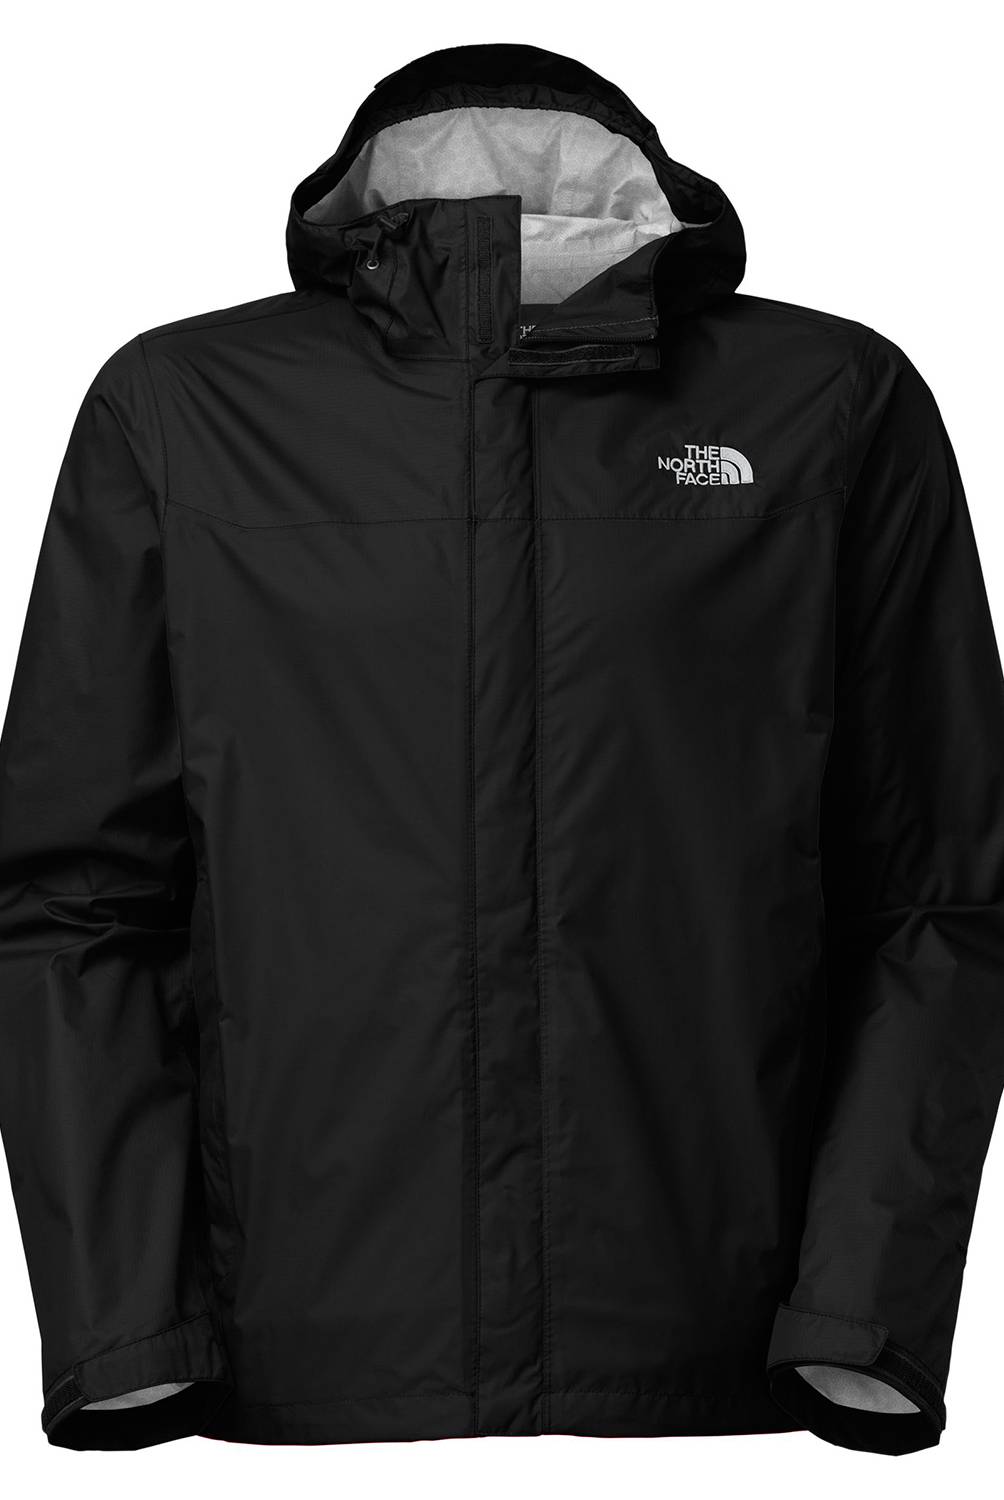 North Face - A8ARKX7